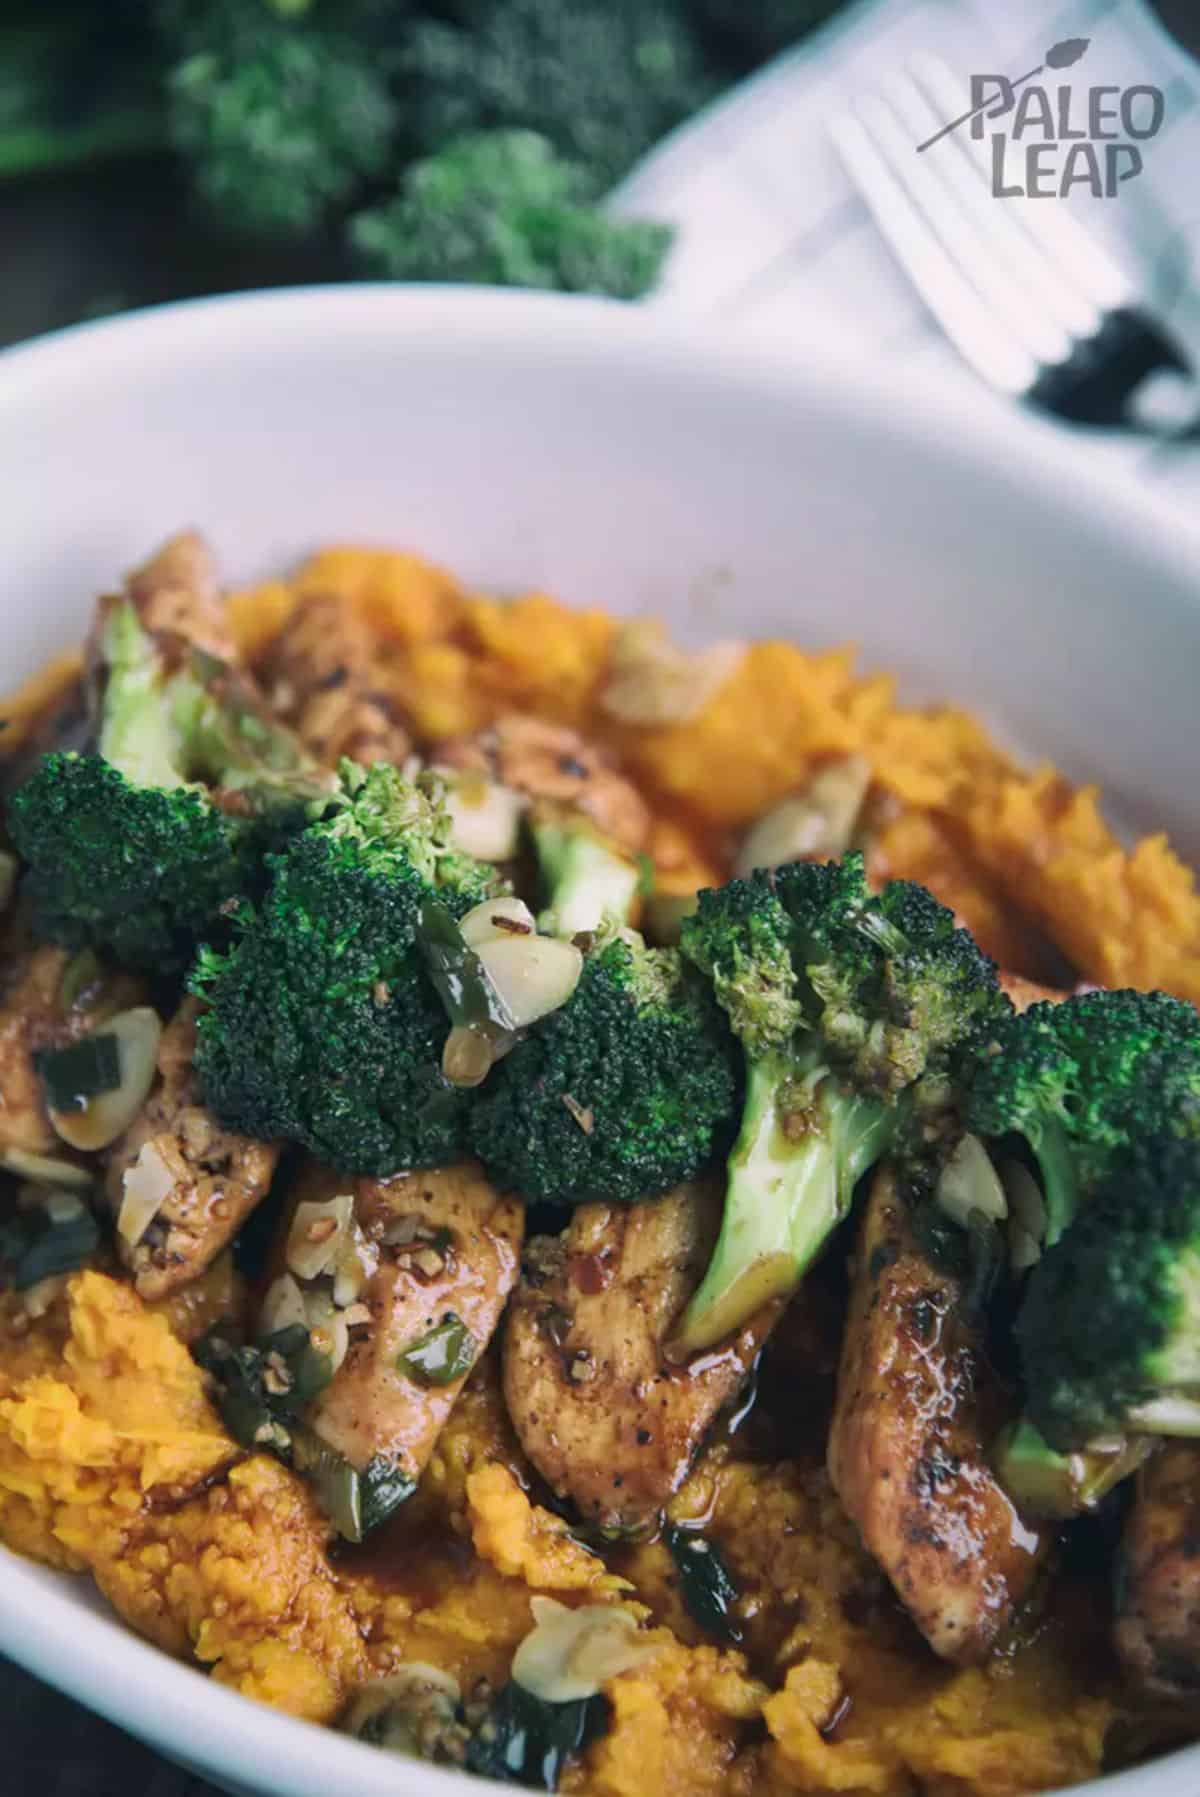 Glazed Chicken With Broccoli And Mashed Sweet Potatoes in a white bowl.